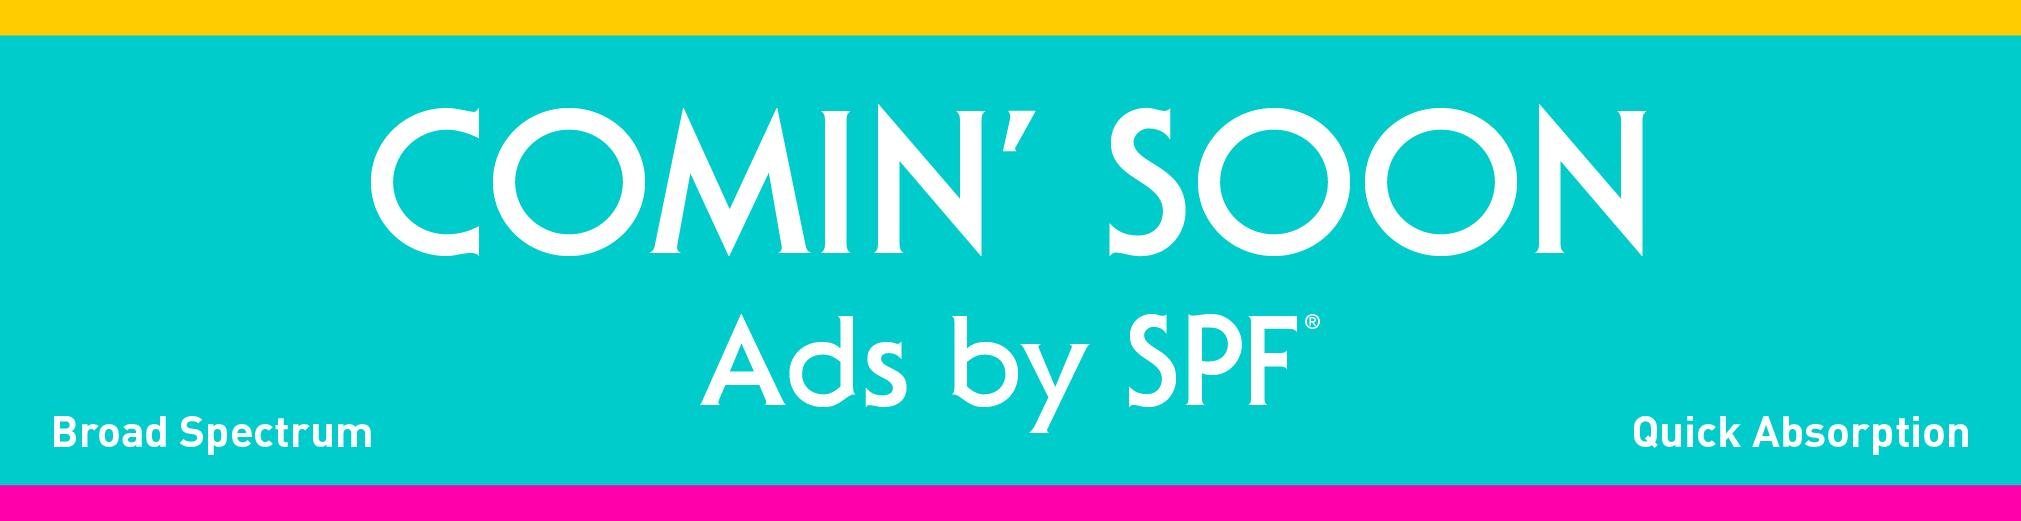 Ads by SPF Comin' Soon